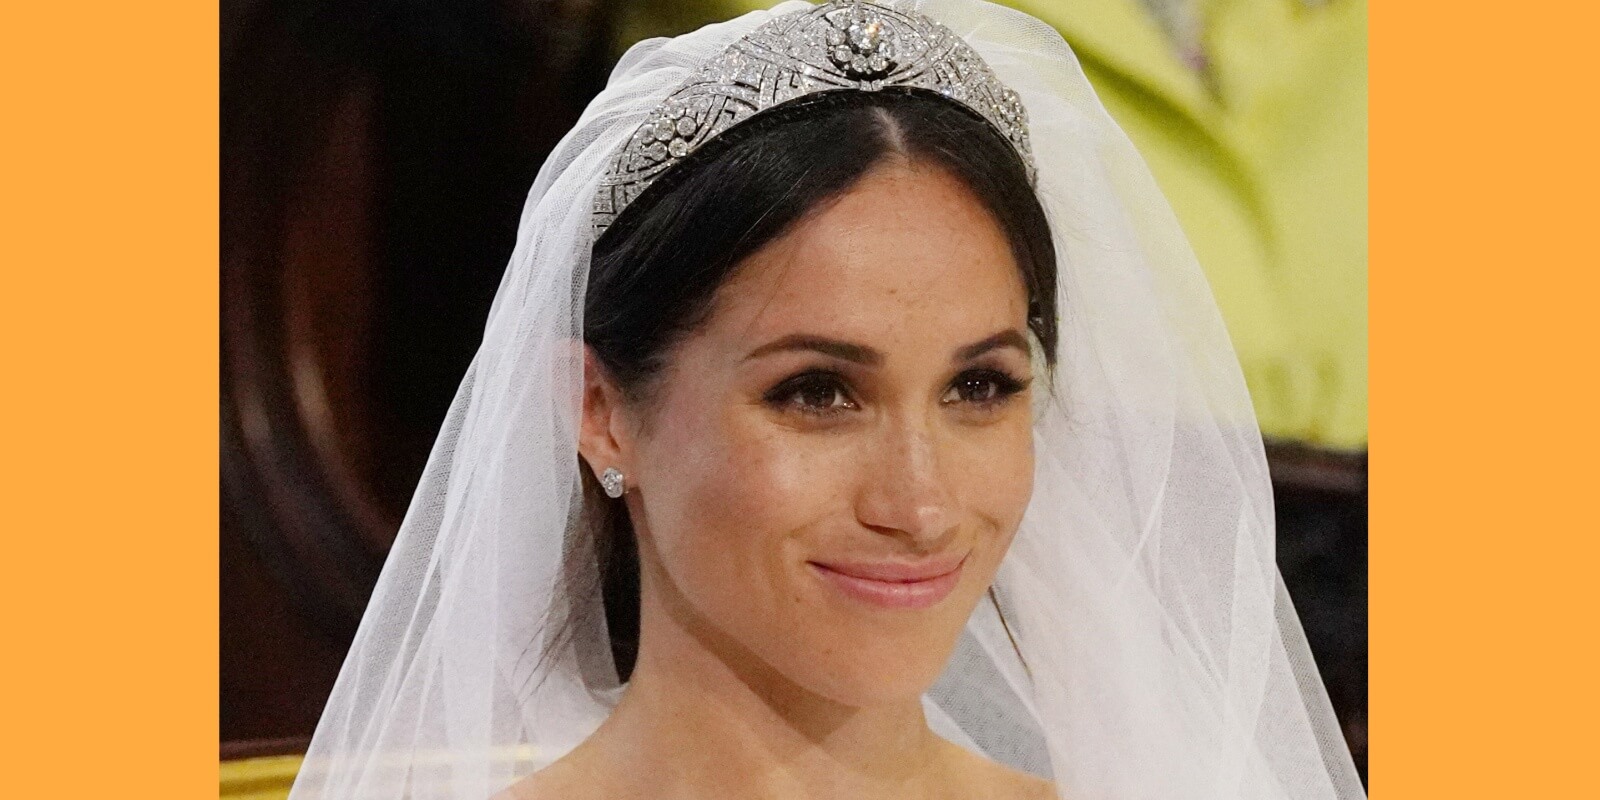 Meghan Markle on her wedding day to Prince Harry in 2018 when she assumed the title of Duchess of Sussex and Princess Henry.